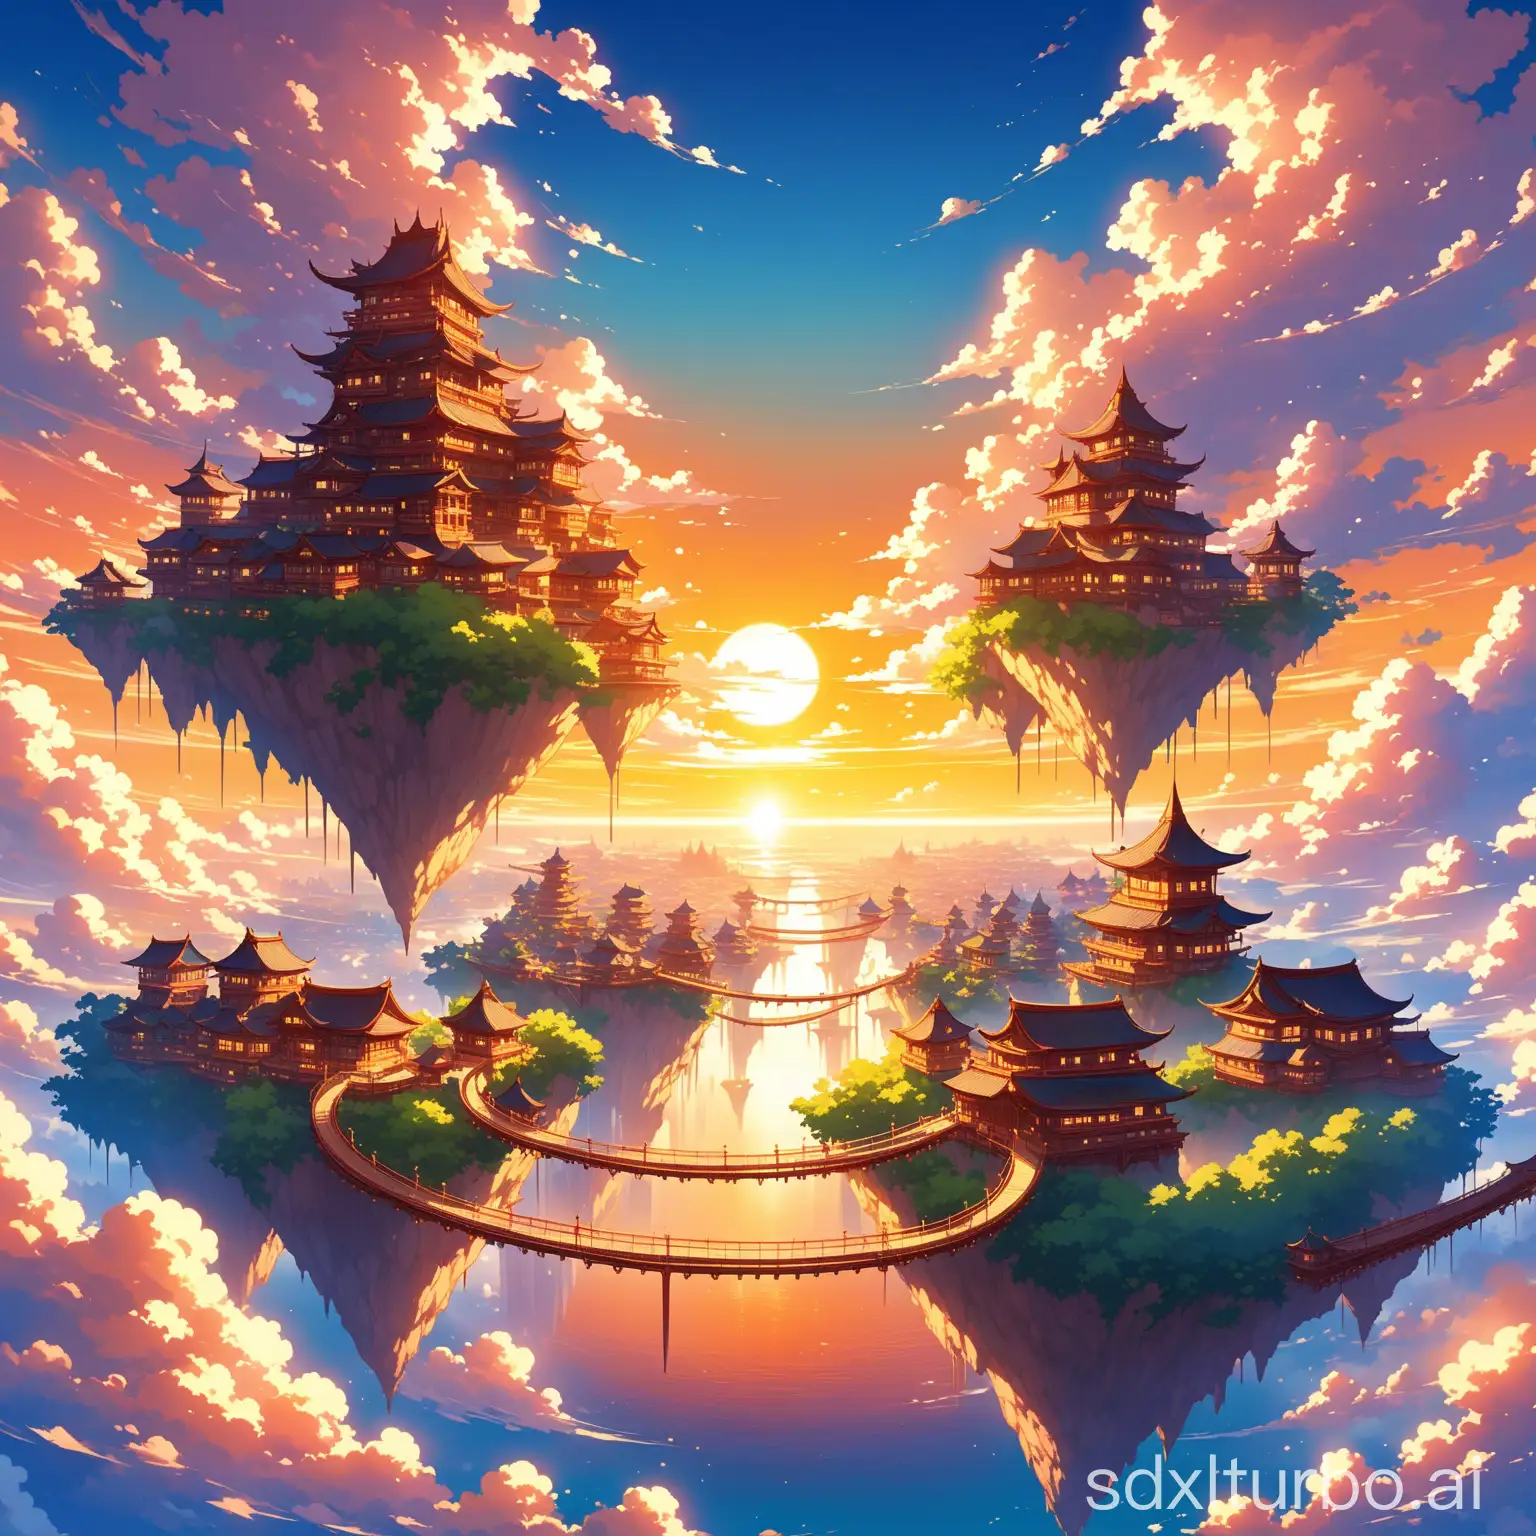 Anime style: a fantasy city floating in the sky, having exquisite architecture, floating islands and connecting bridges, all with a background of floating clouds and sunset